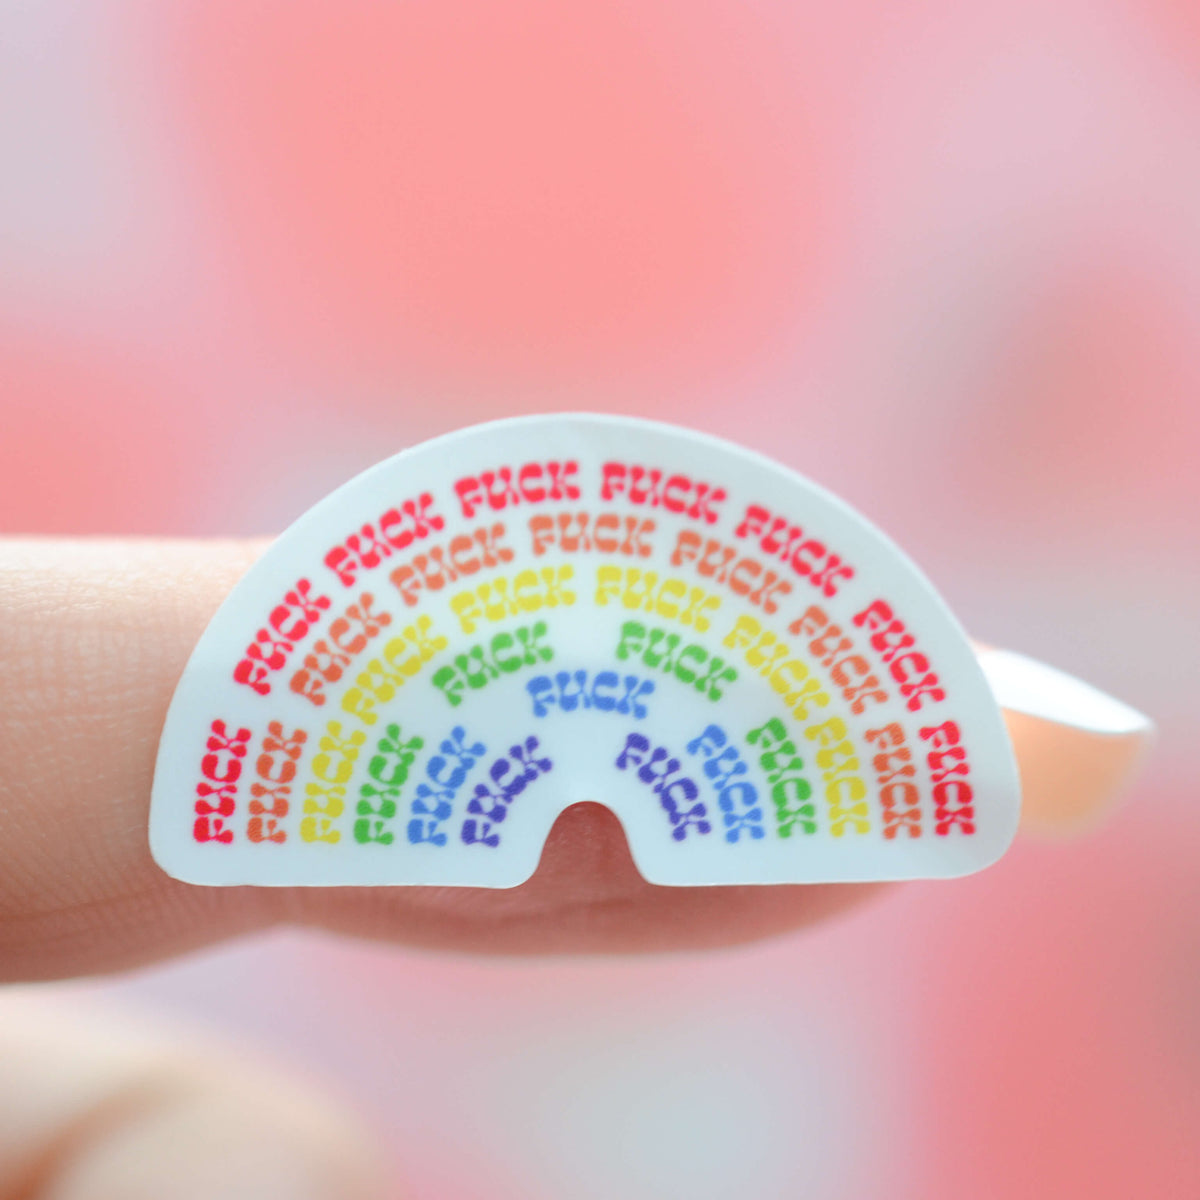 Small Sticker of a rainbow that says fuck stuck to a finger